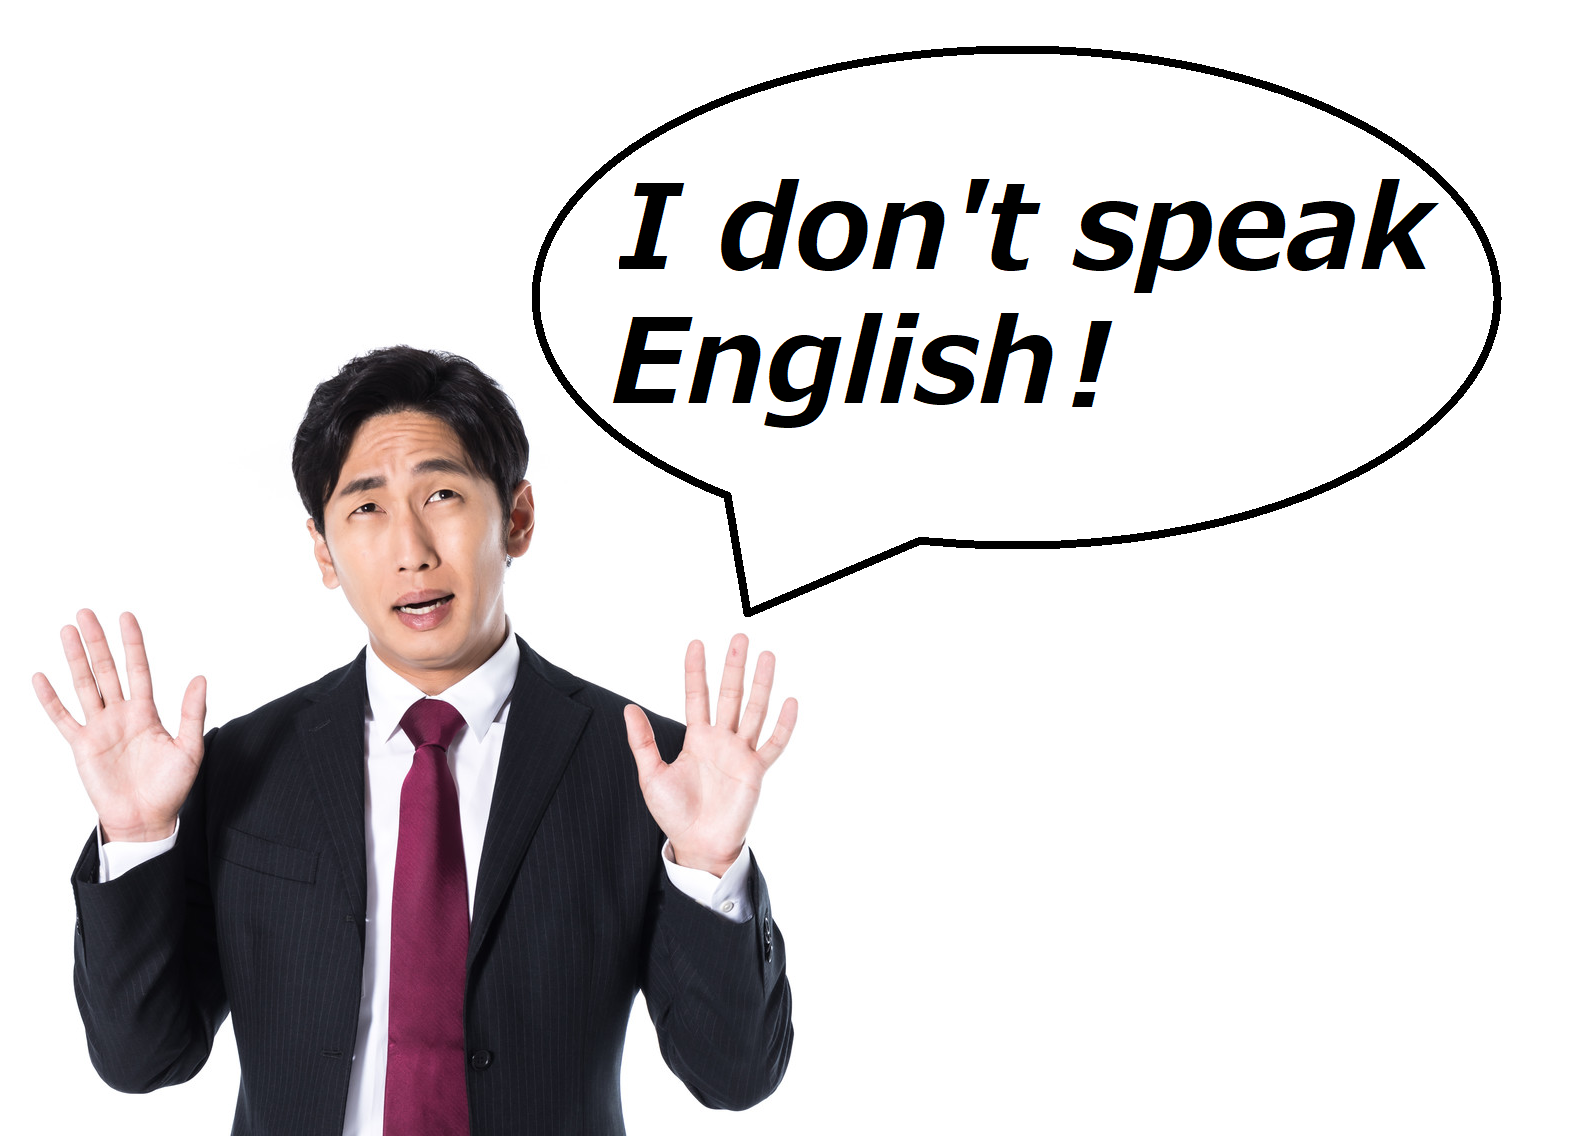 How To Respond To Japanese People Saying I Don T Speak English When You Re Speaking Japanese Soranews24 Japan News